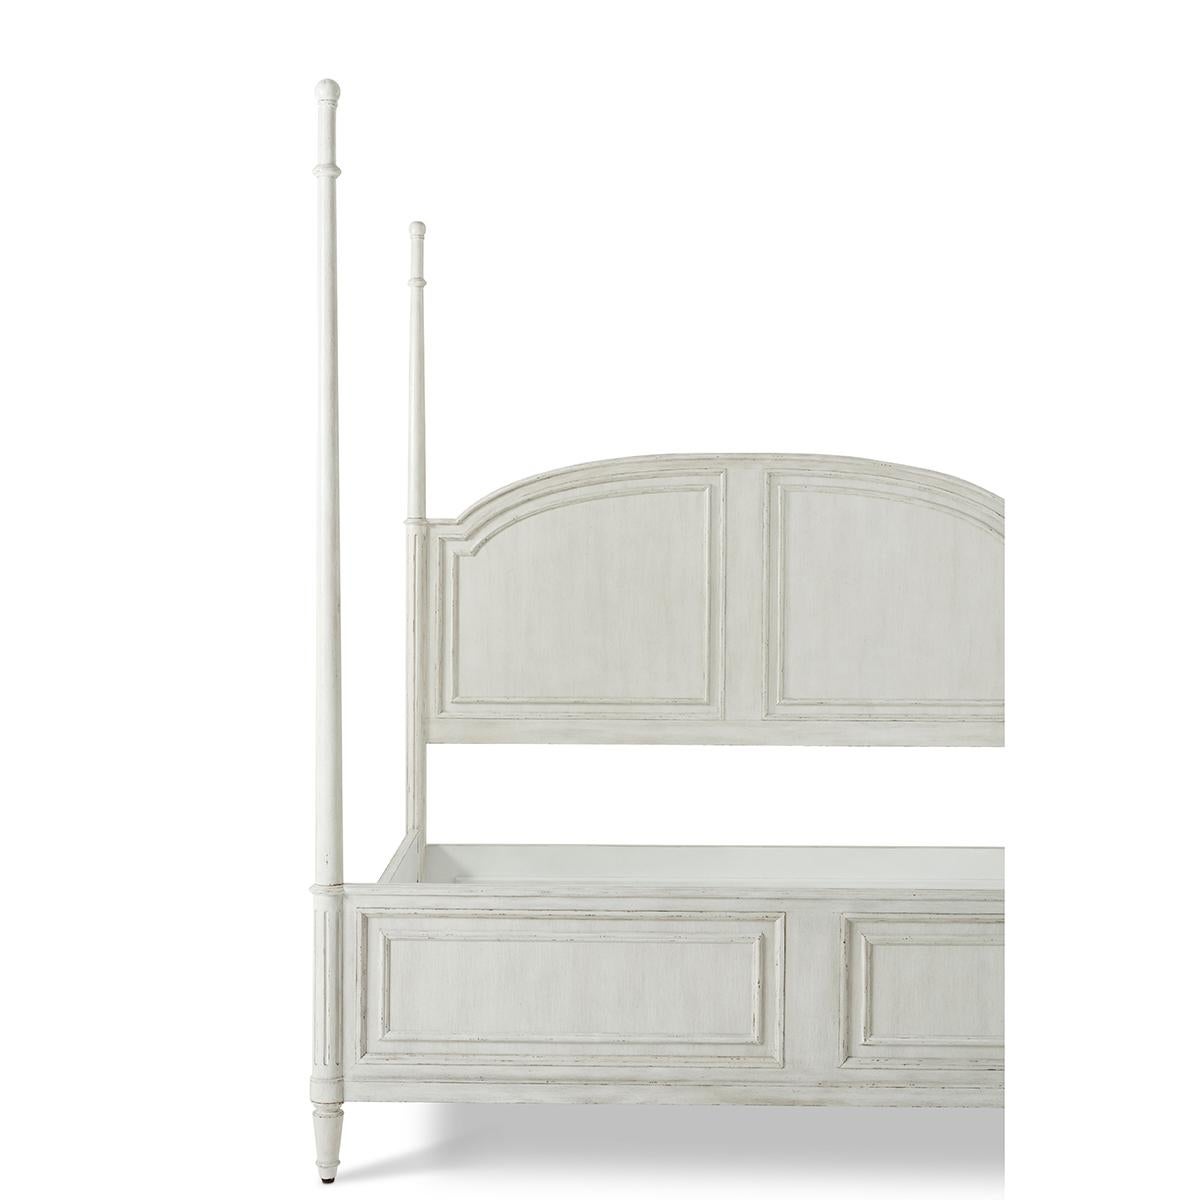 Contemporary Rustic Painted Four Post California King Bed For Sale